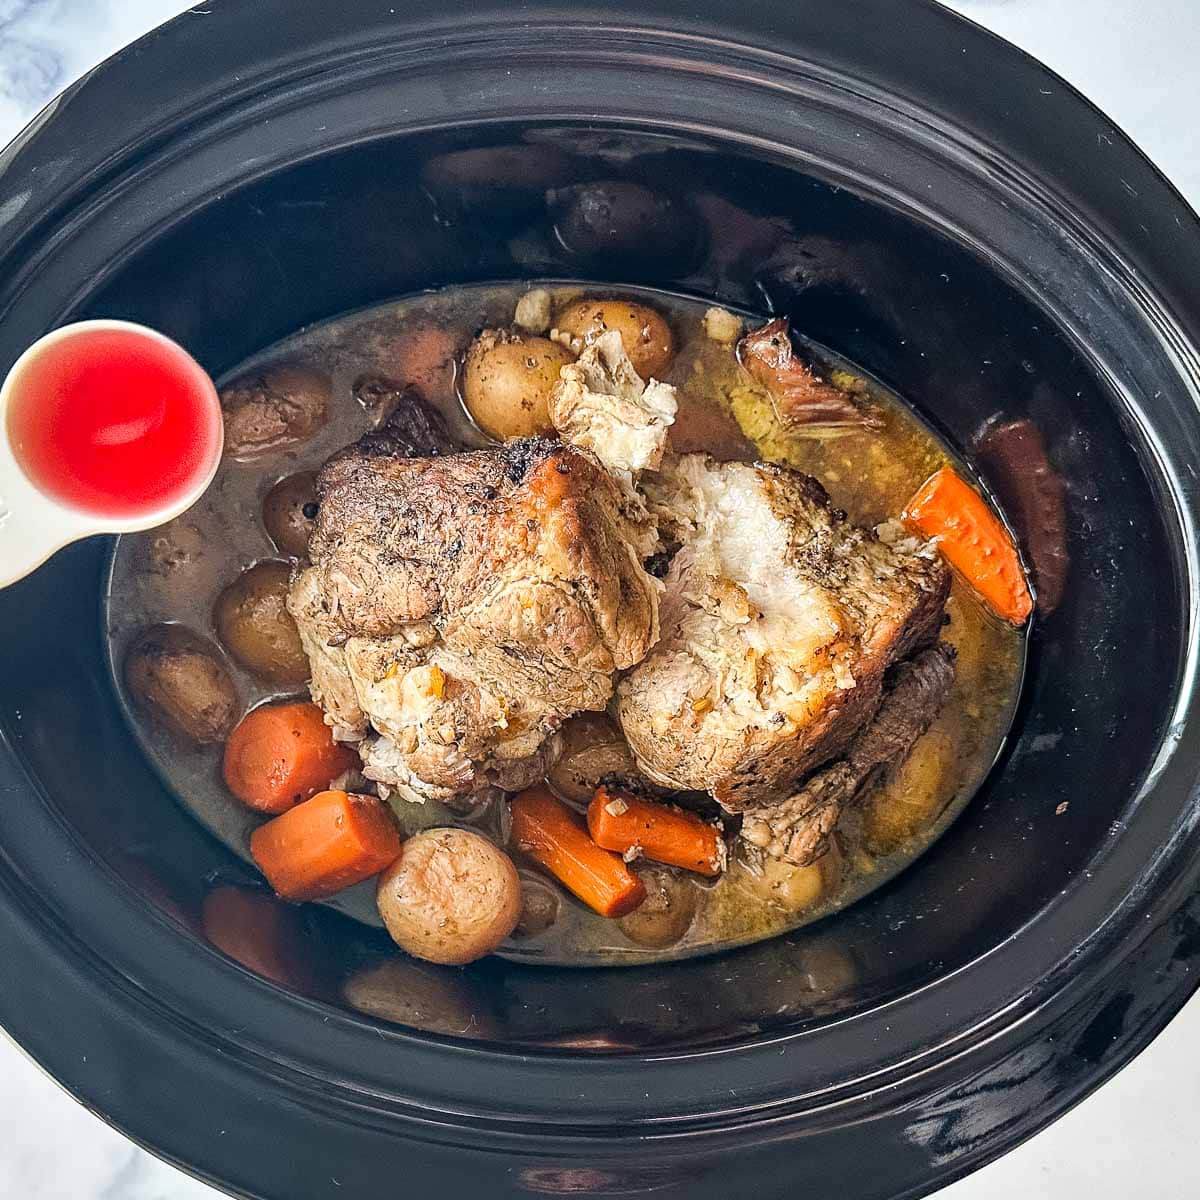 Red wine vinegar is added to a crock pot full of pork and vegetables.